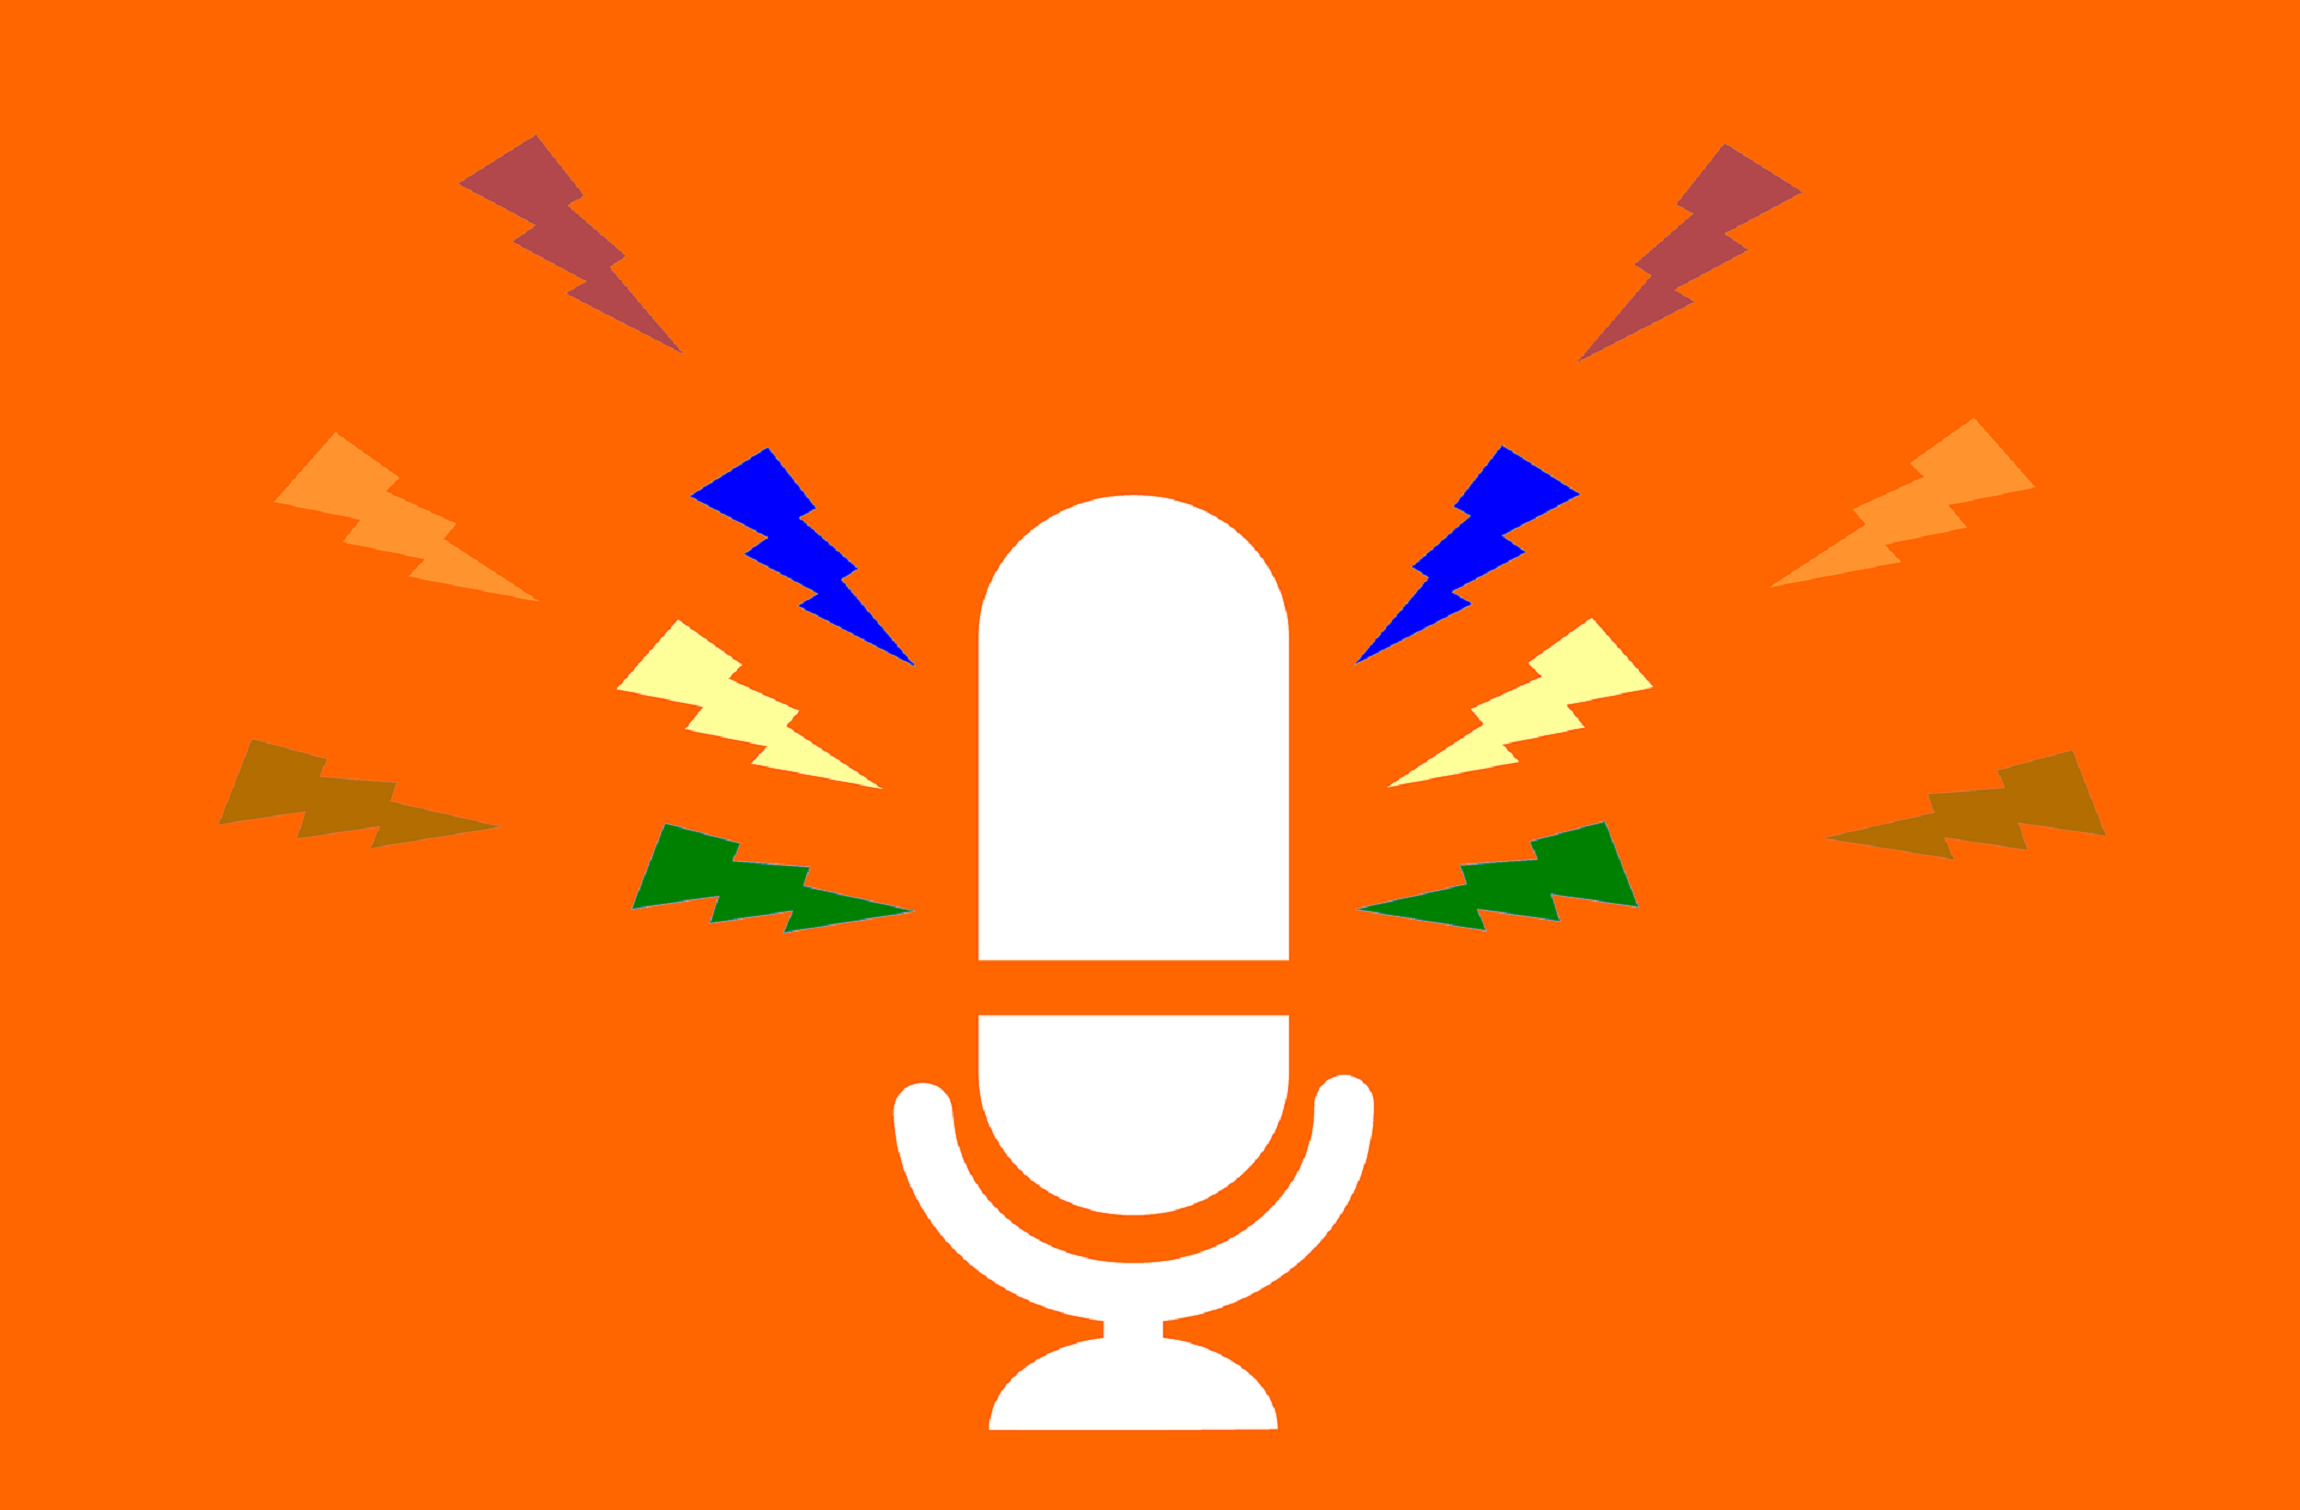 EXCLUSIVE: HOW TO CREATE A MICRO PODCAST IN 5 MINUTES